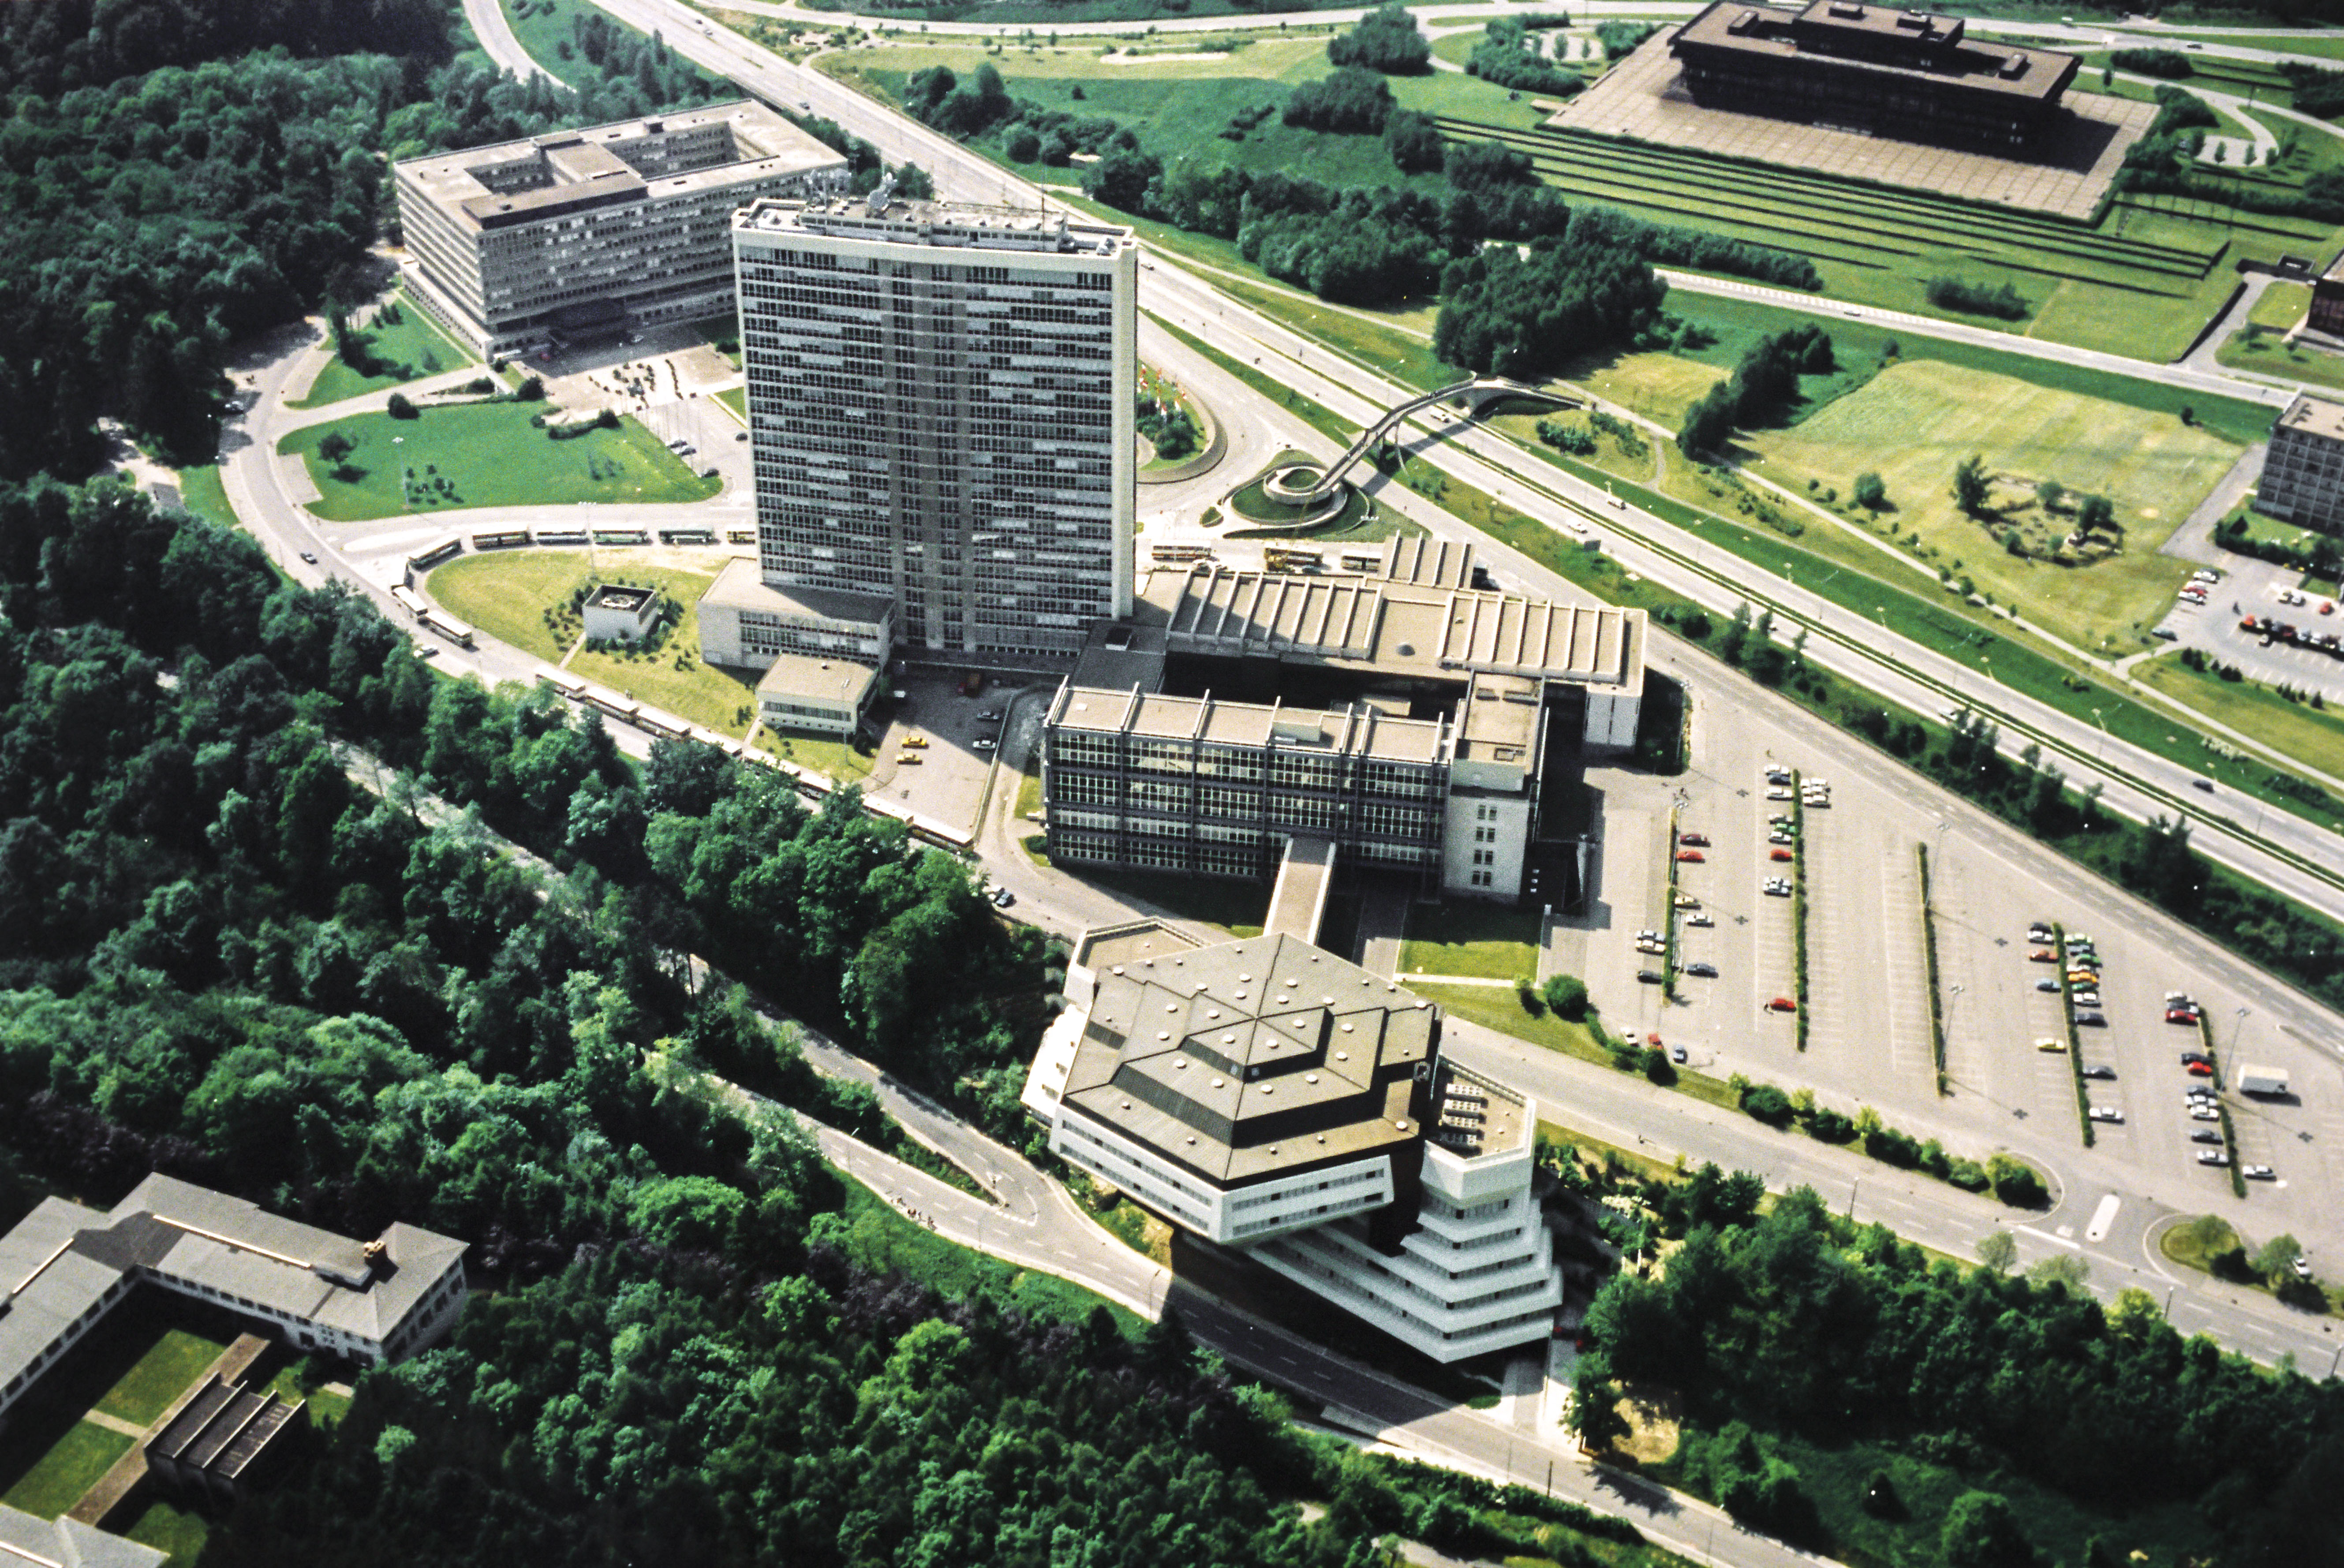 Aerial view of the European Parliament in Luxembourg